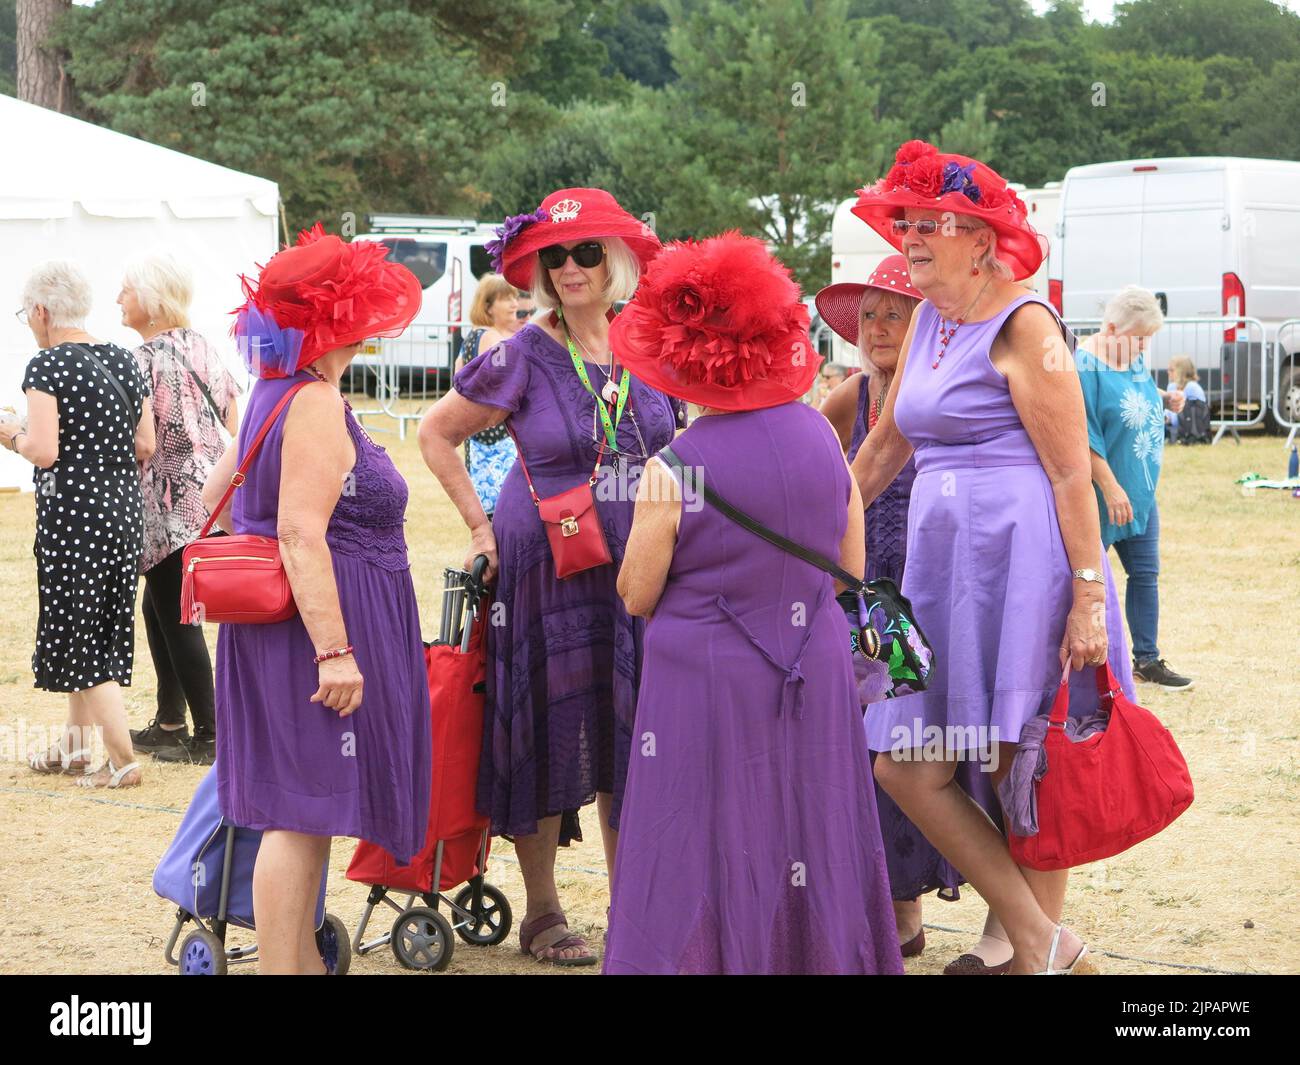 Members of the Diss Red Hatters wore purple outfits with red hats for their outing to the Sandringham Flower Show in July 2022. Stock Photo